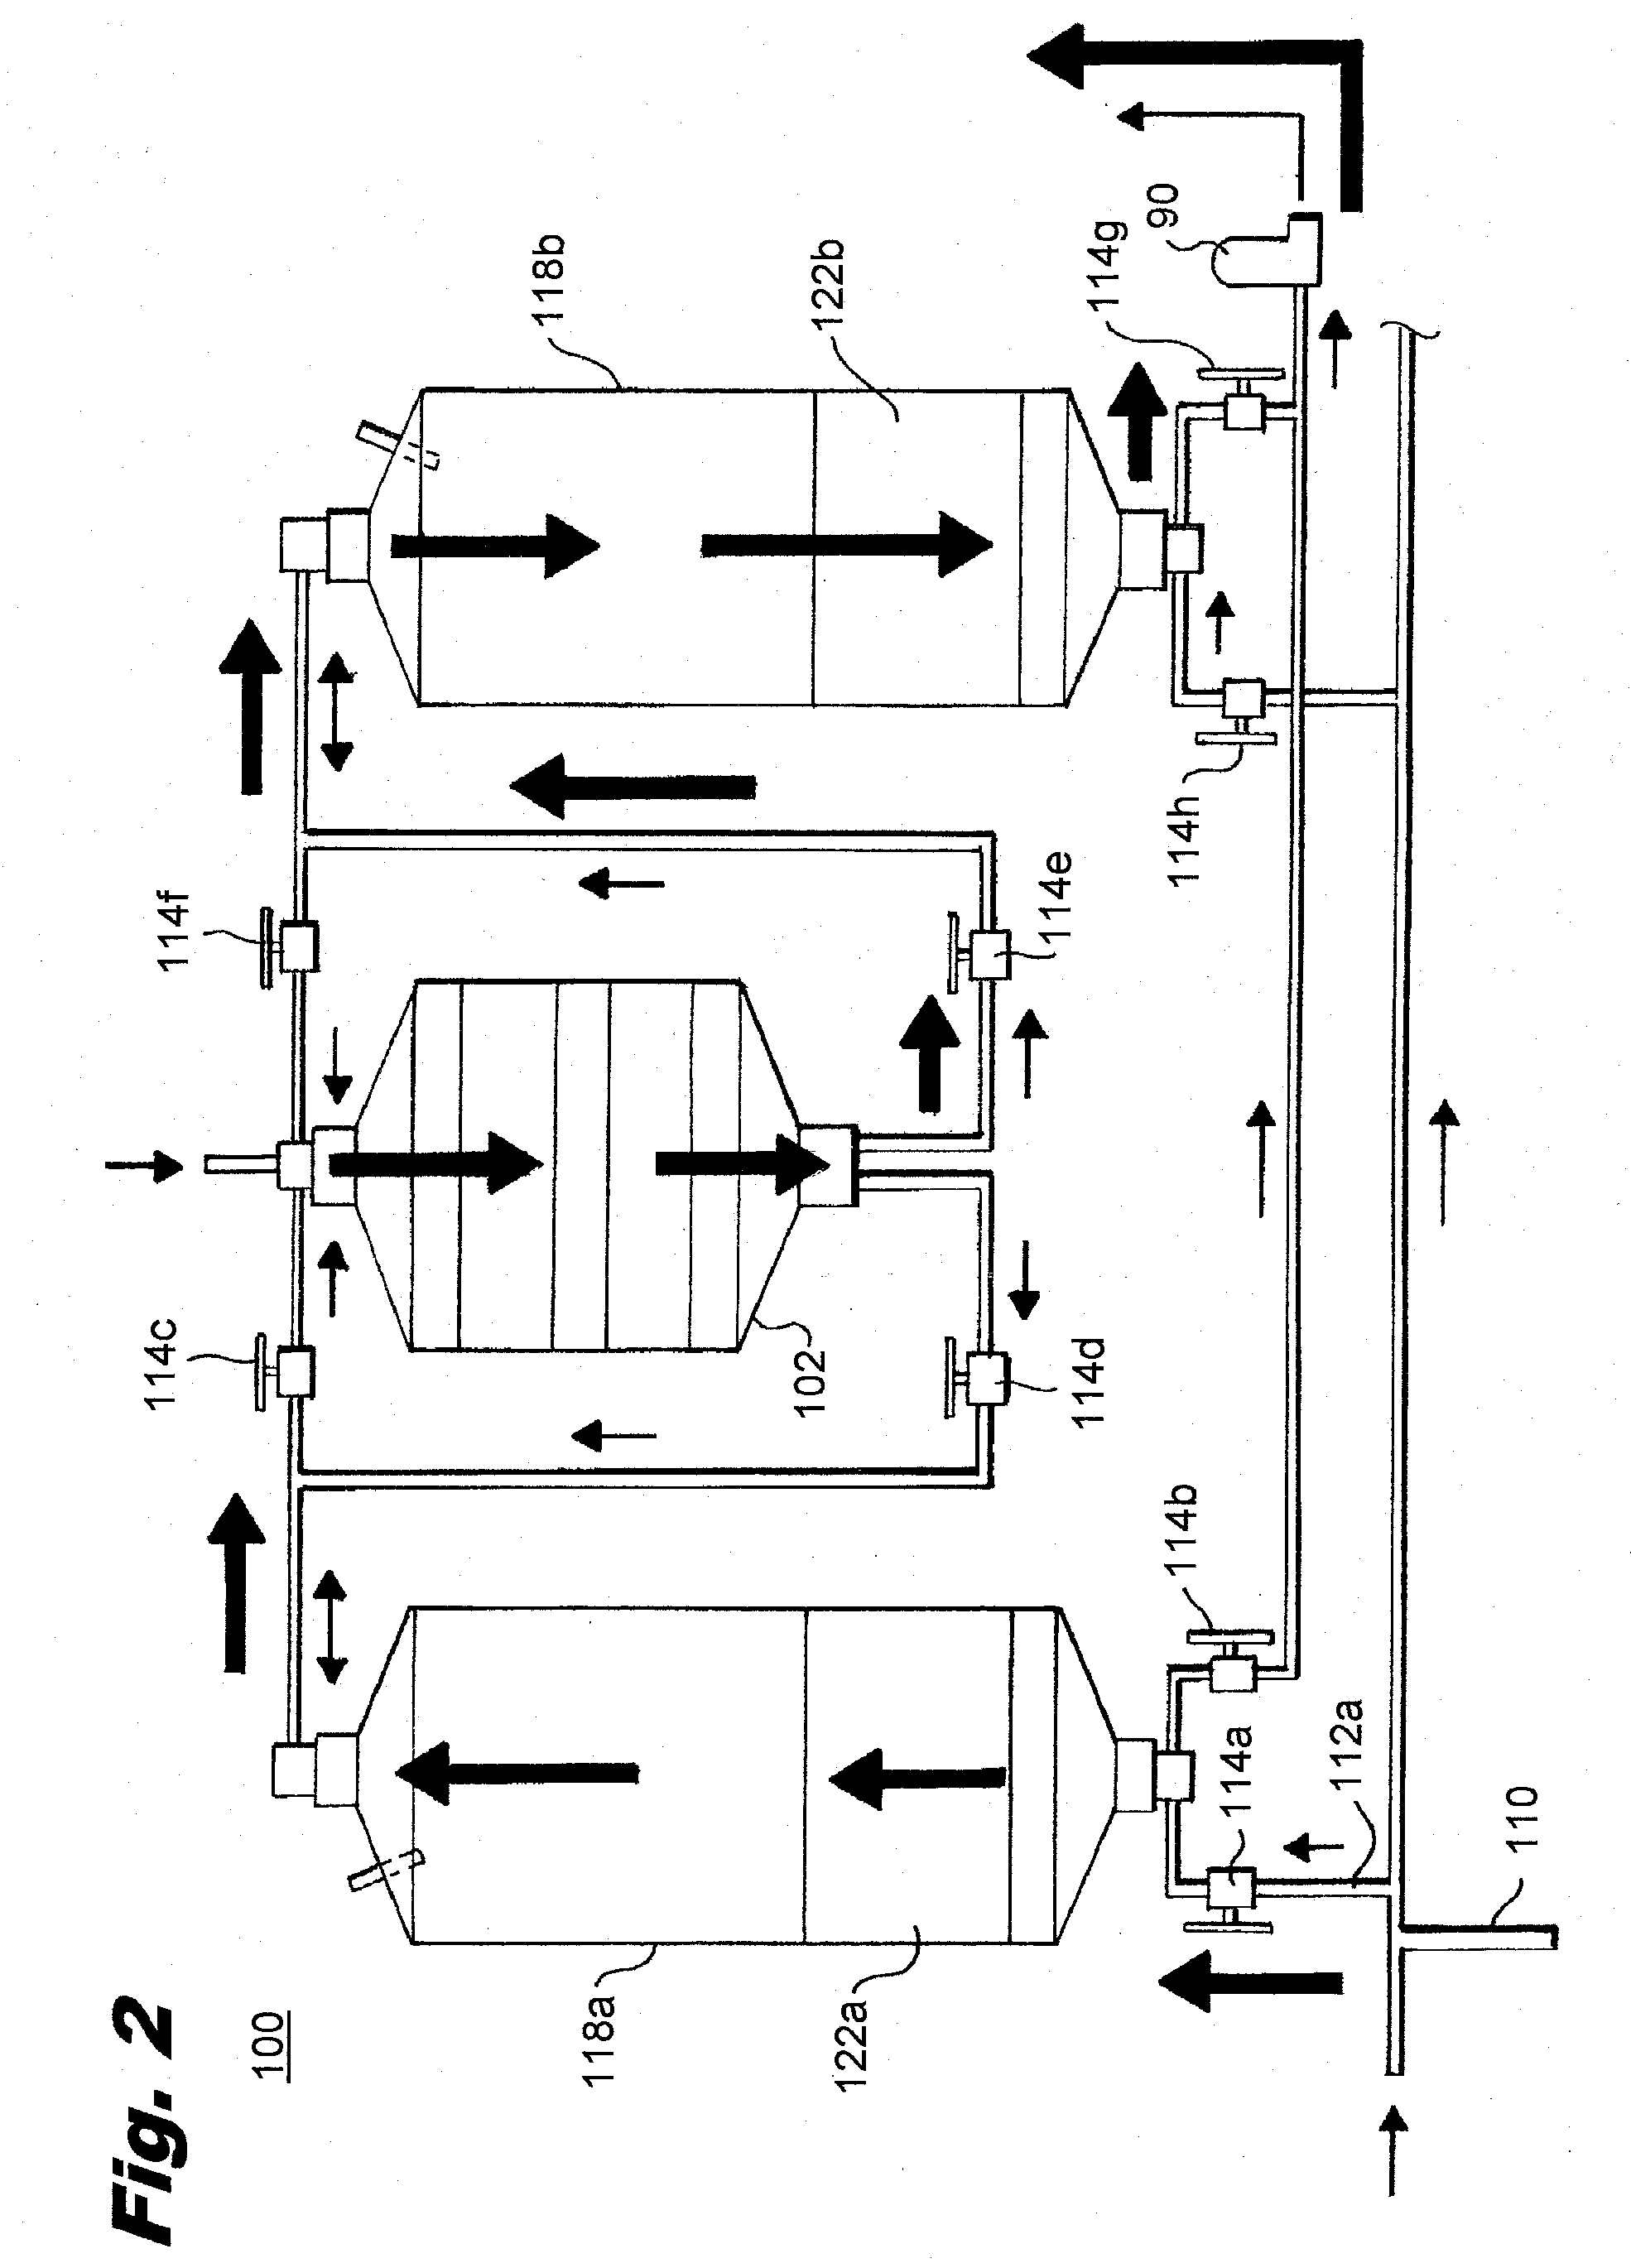 Systems and methods for high efficiency regenerative selective catalytic reduction